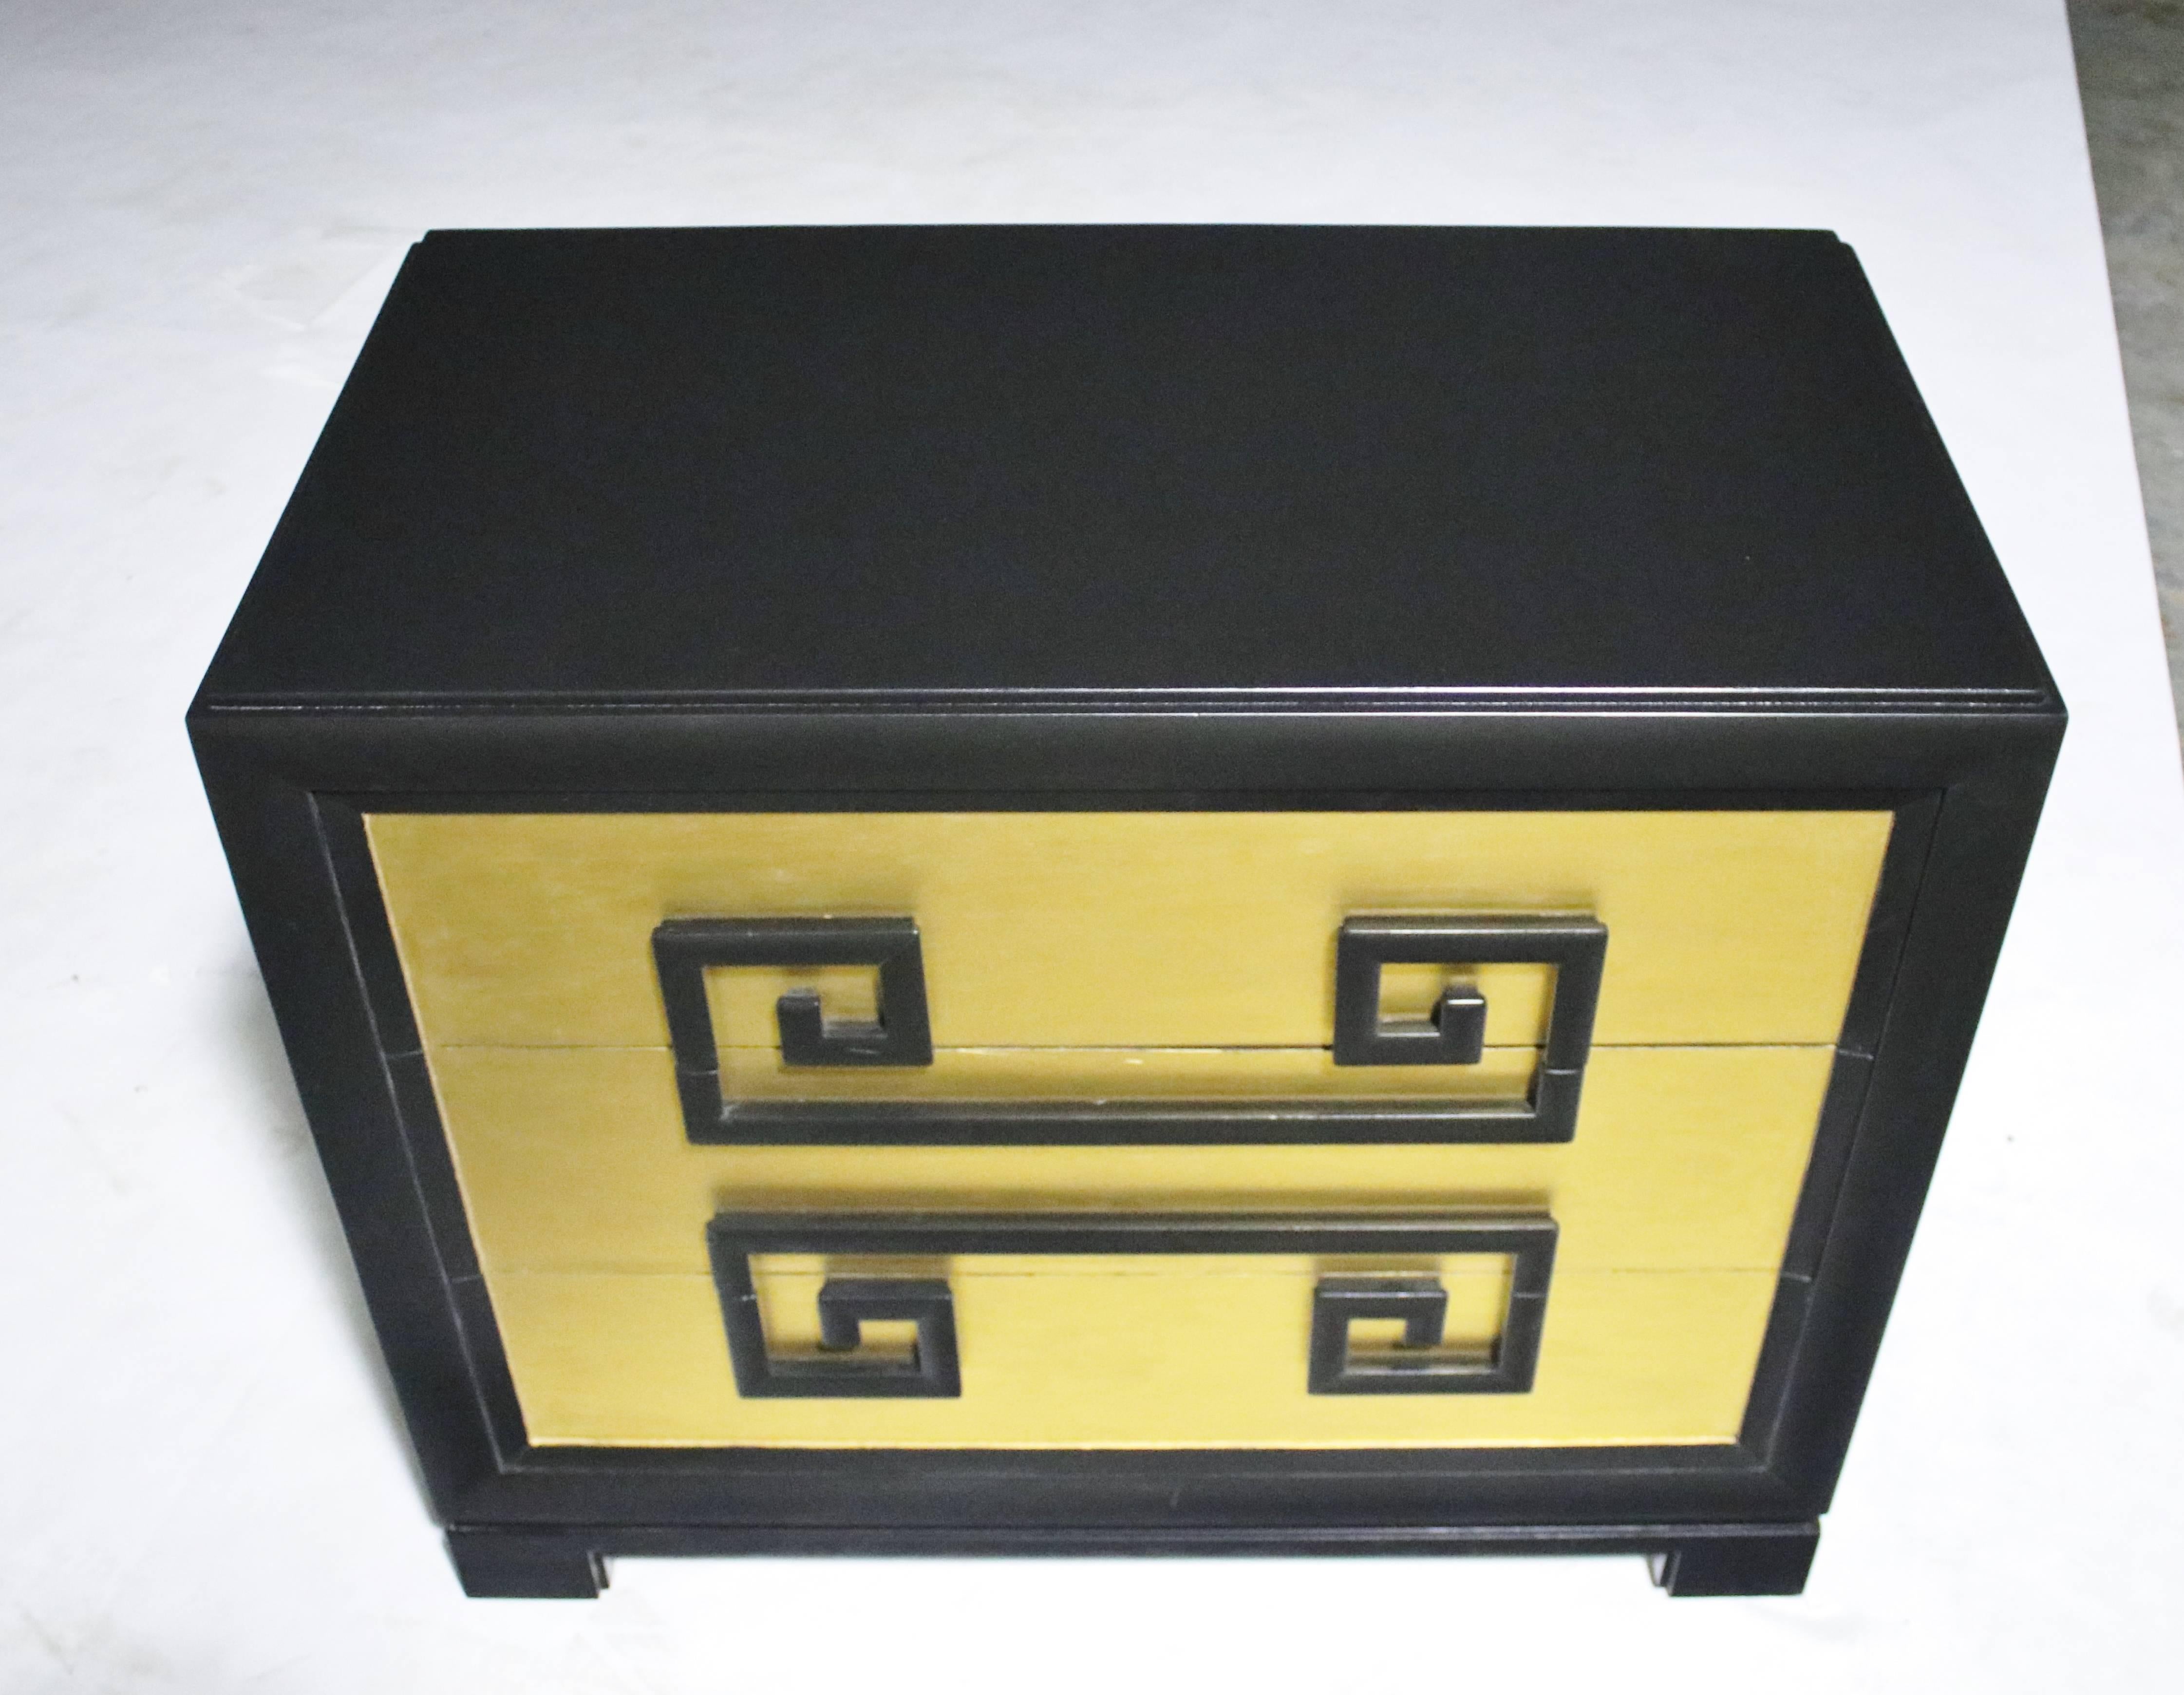 1940s authentic Greek key chest of drawers by Kittinger (labelled) newly refinished in satin black lacquer and gold leaf drawers.